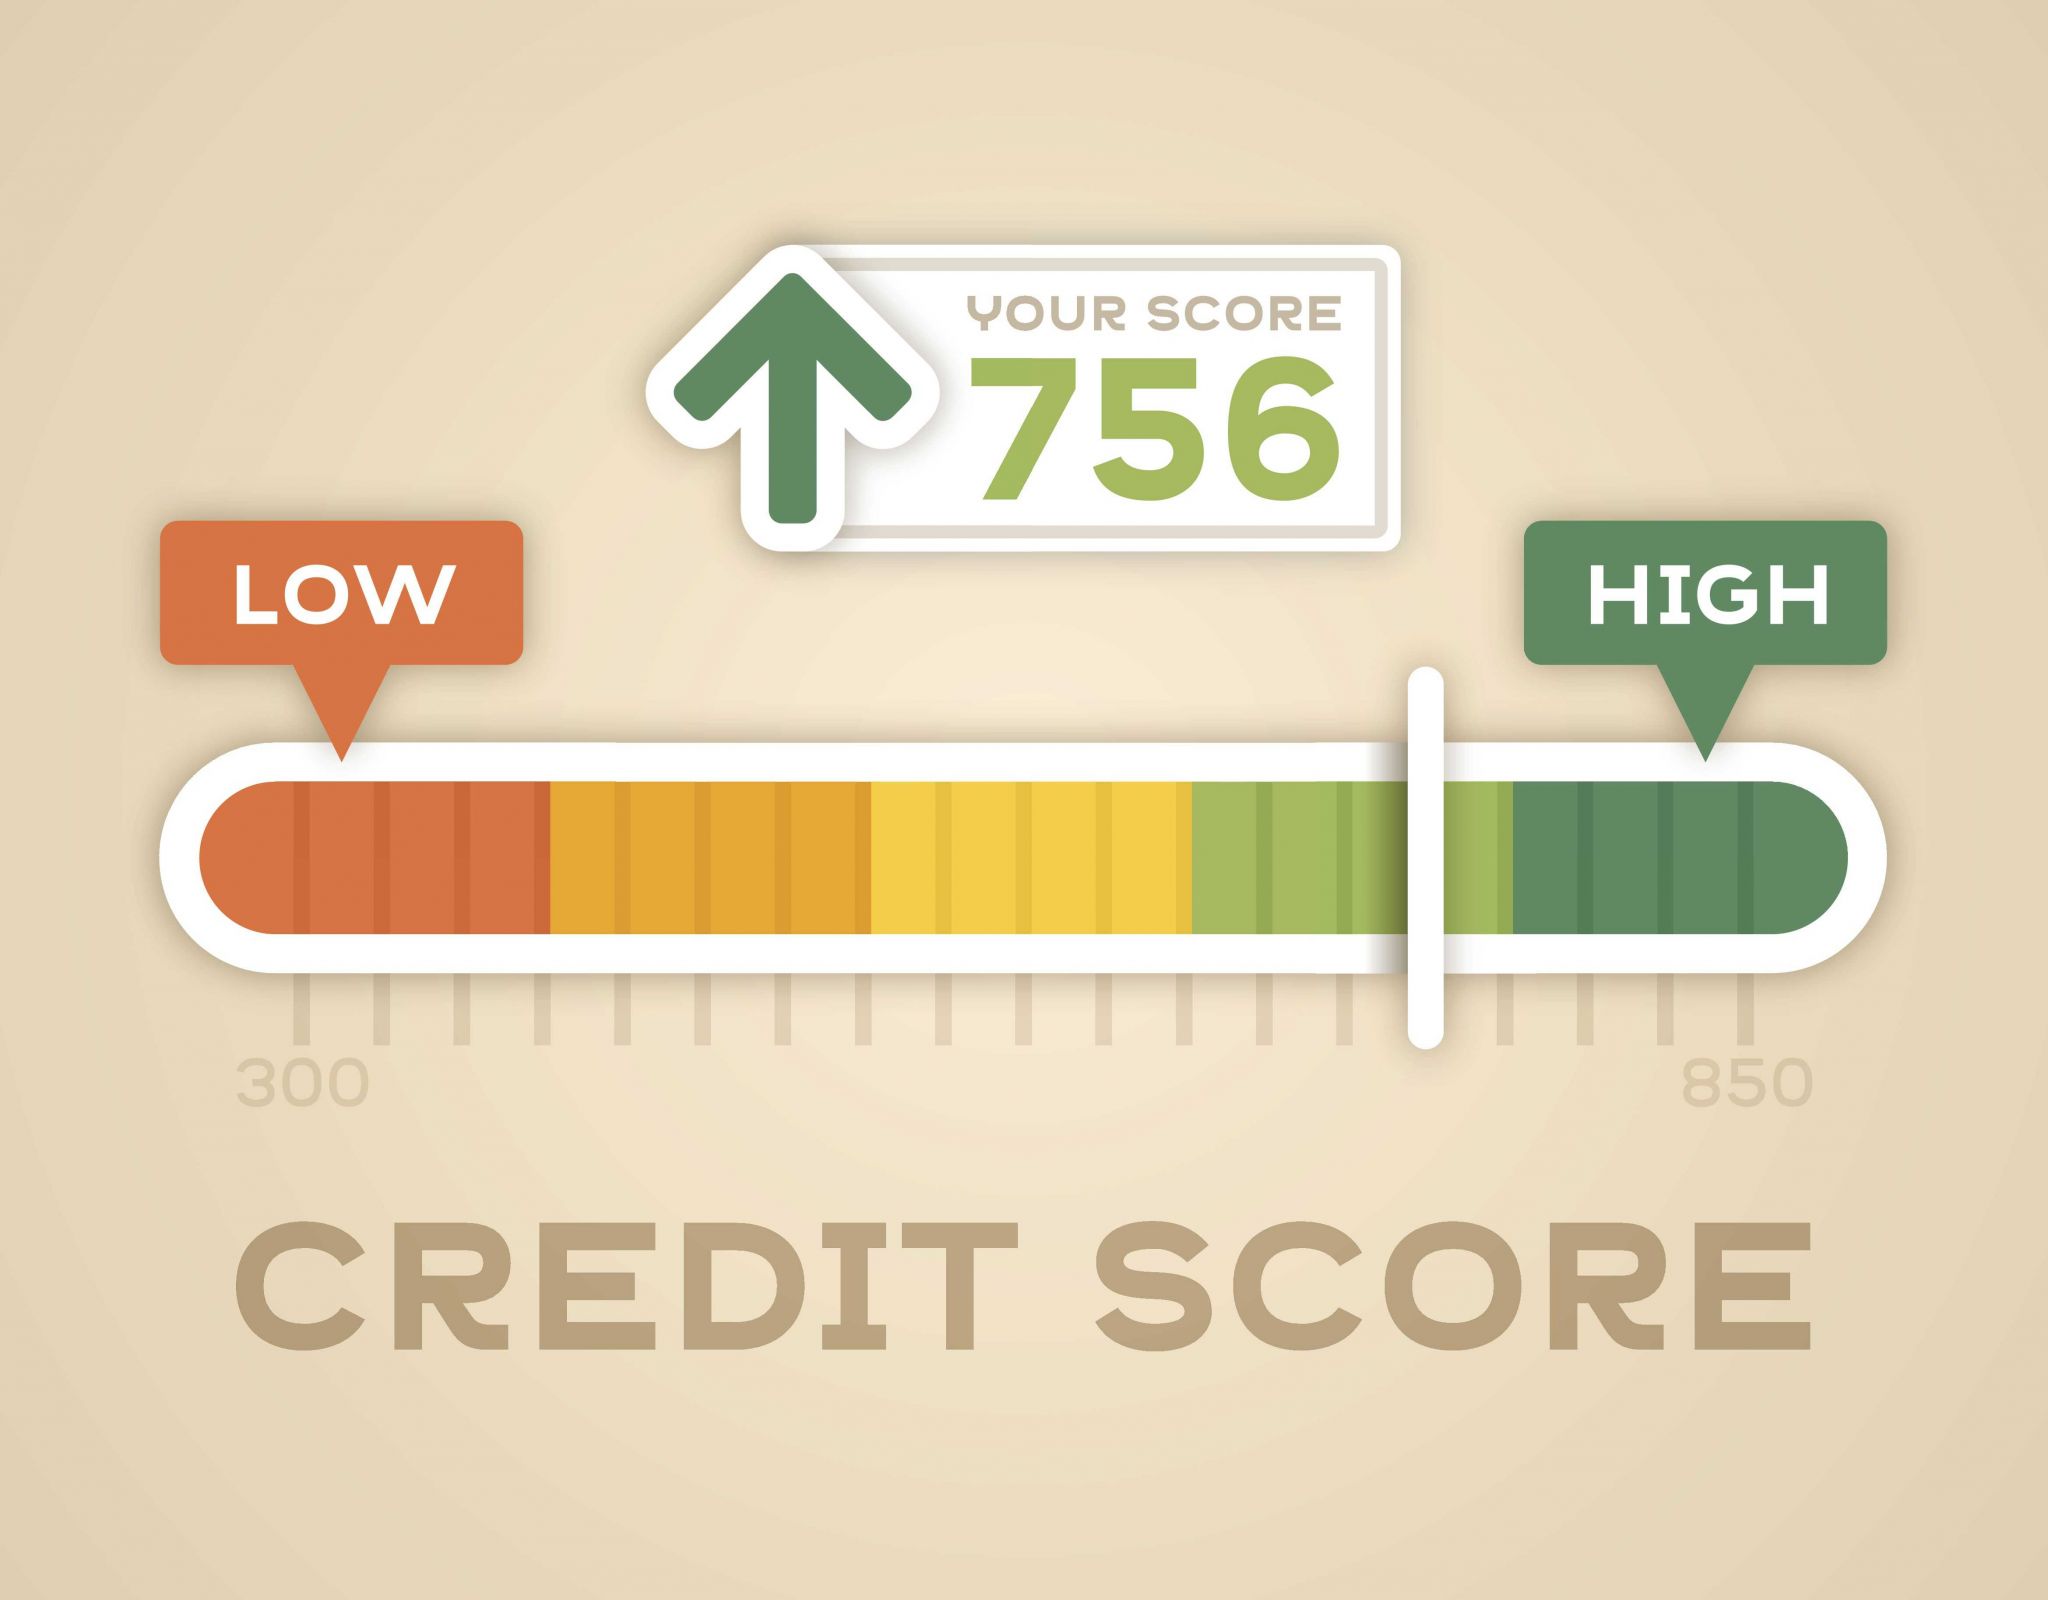 Credit Basics Worksheet Answers and How Credit Scores Work